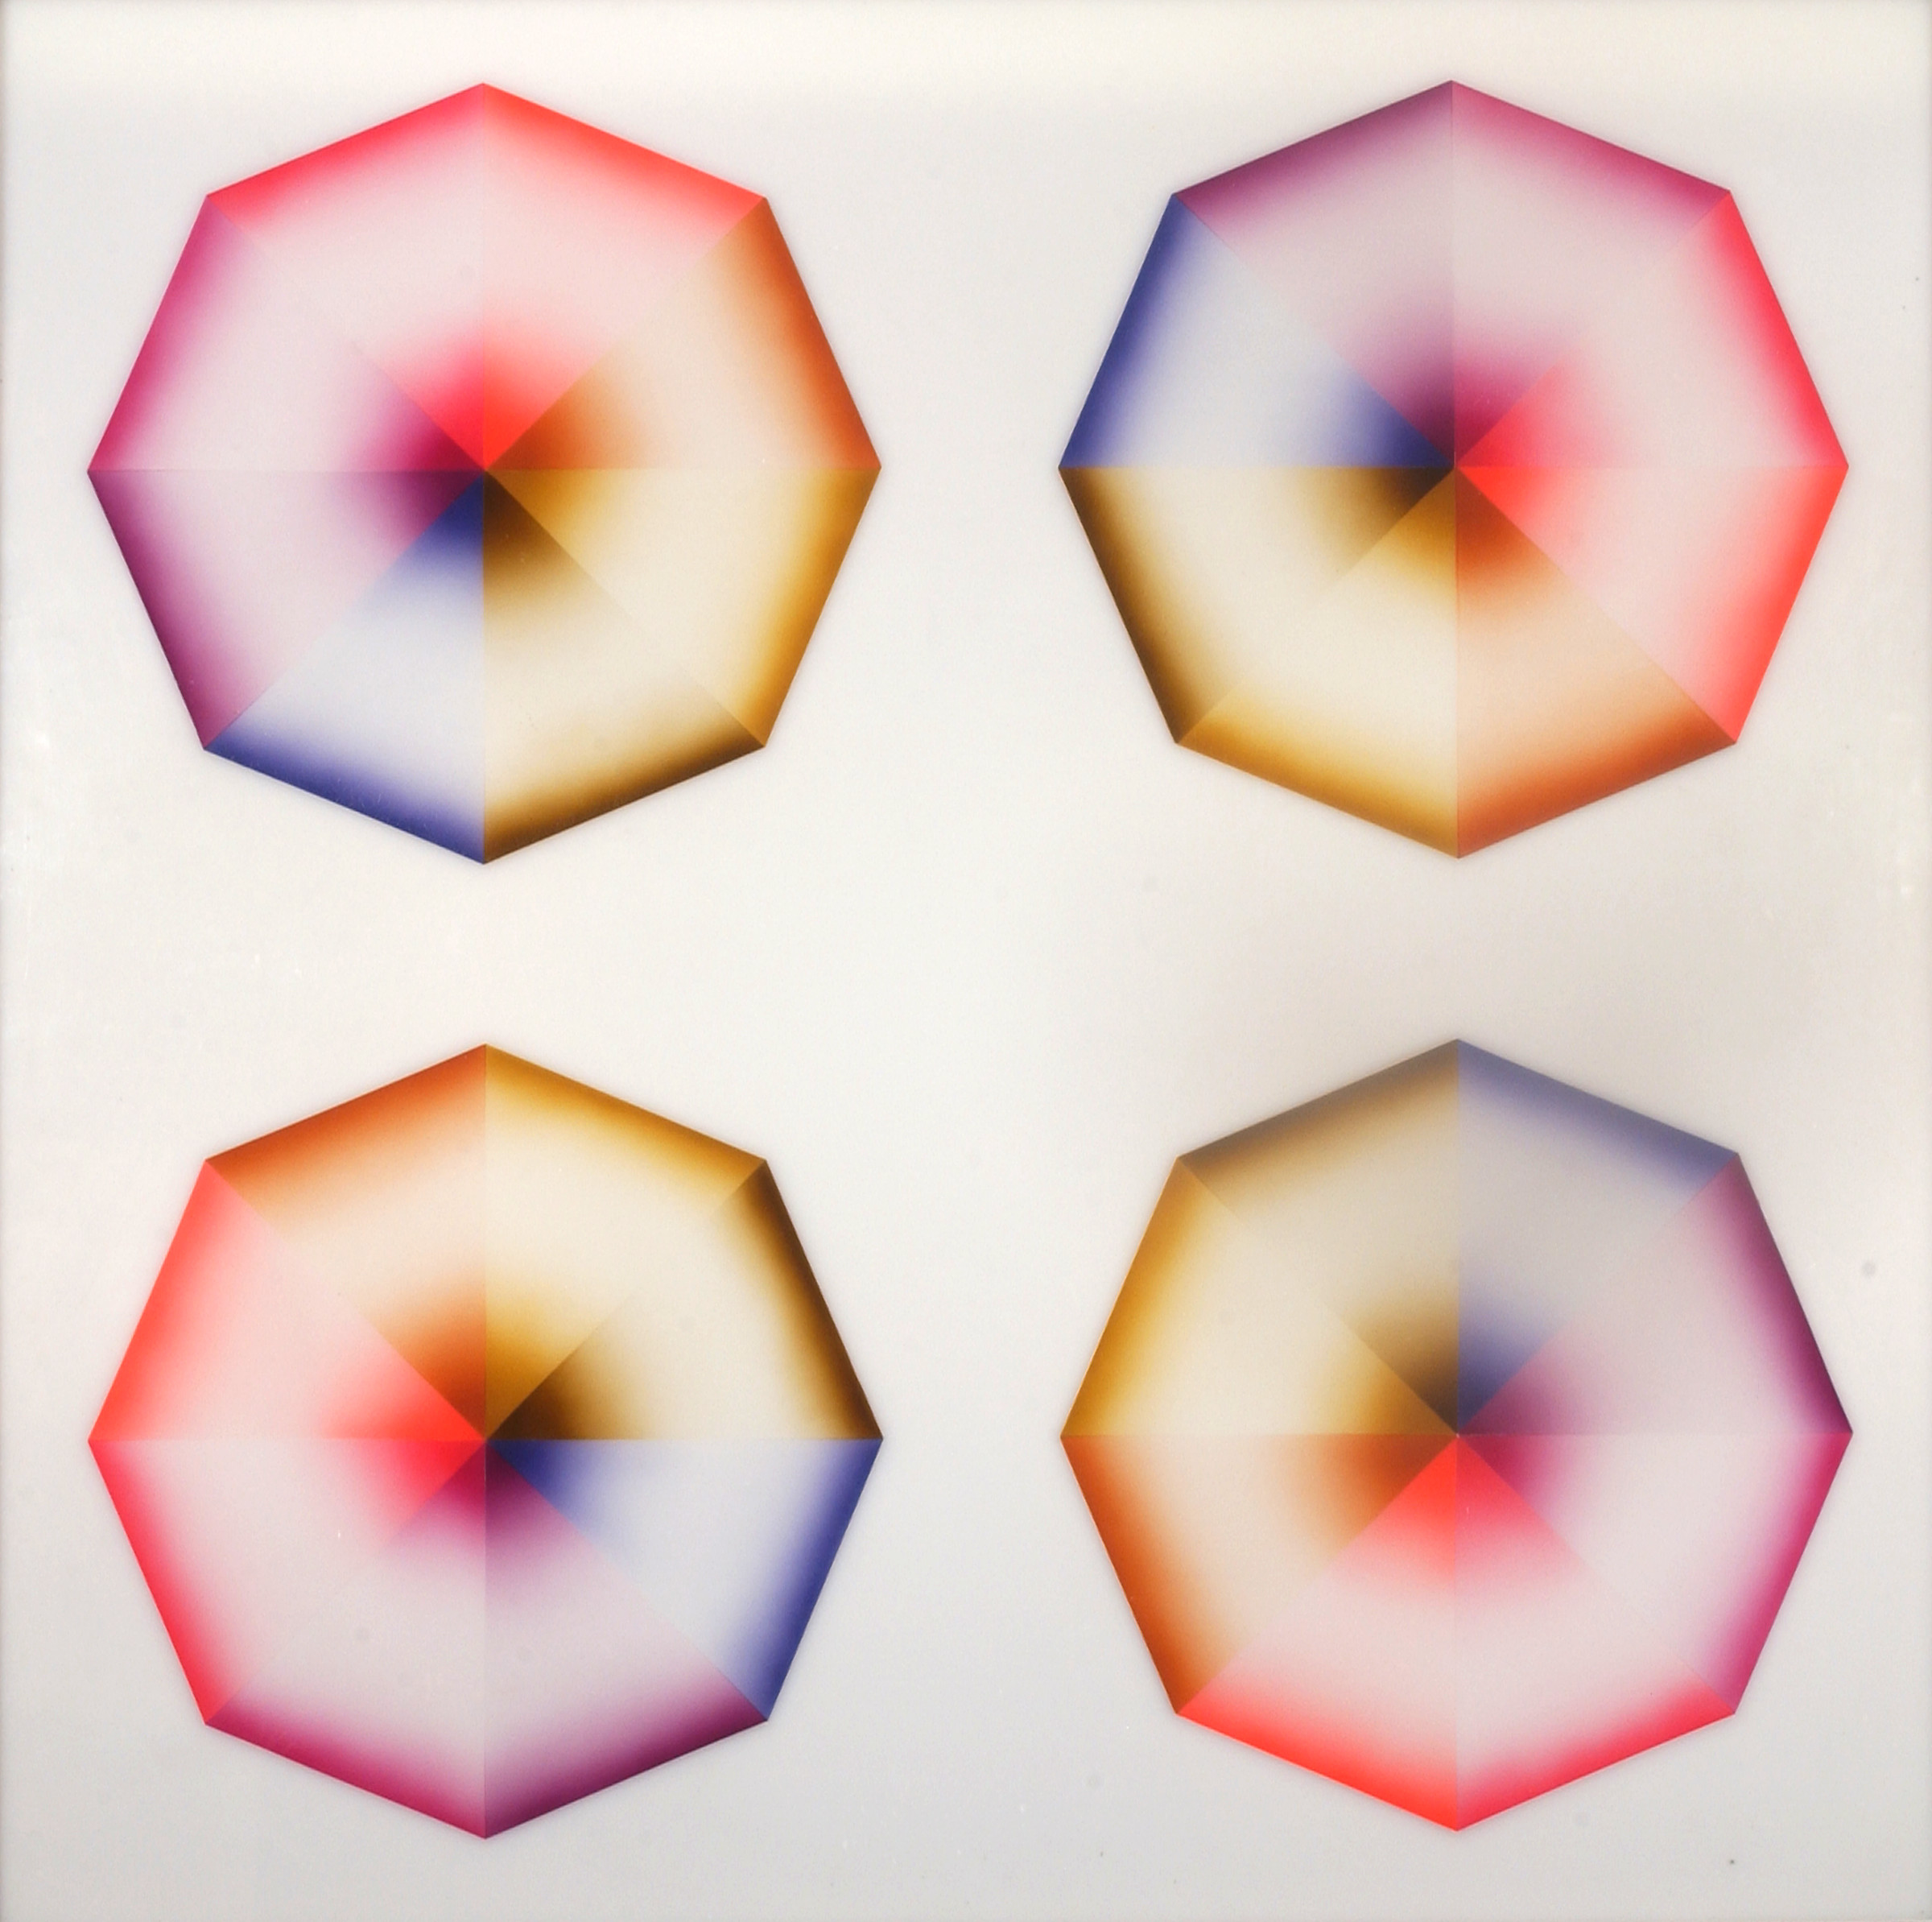 Four hard-edged octagons, each divided into eight pie-slice shapes painted red, pink, orange, yellow, olive green, blue, violet, or lavender, occupy a square, white background. Dark at the wide and narrow ends of each wedge, the hues create the illusion of 3-dimensional forms.